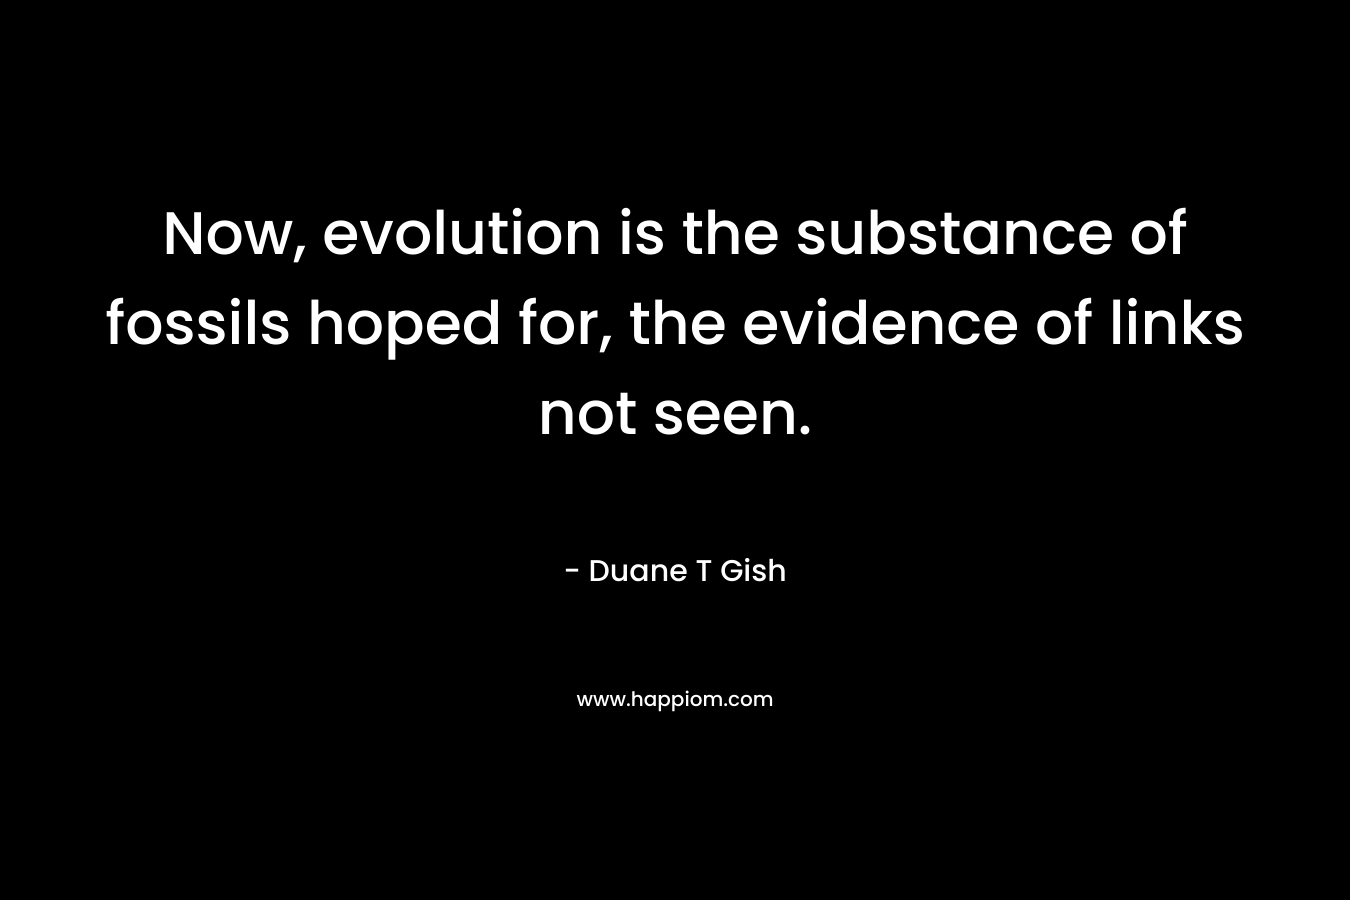 Now, evolution is the substance of fossils hoped for, the evidence of links not seen.